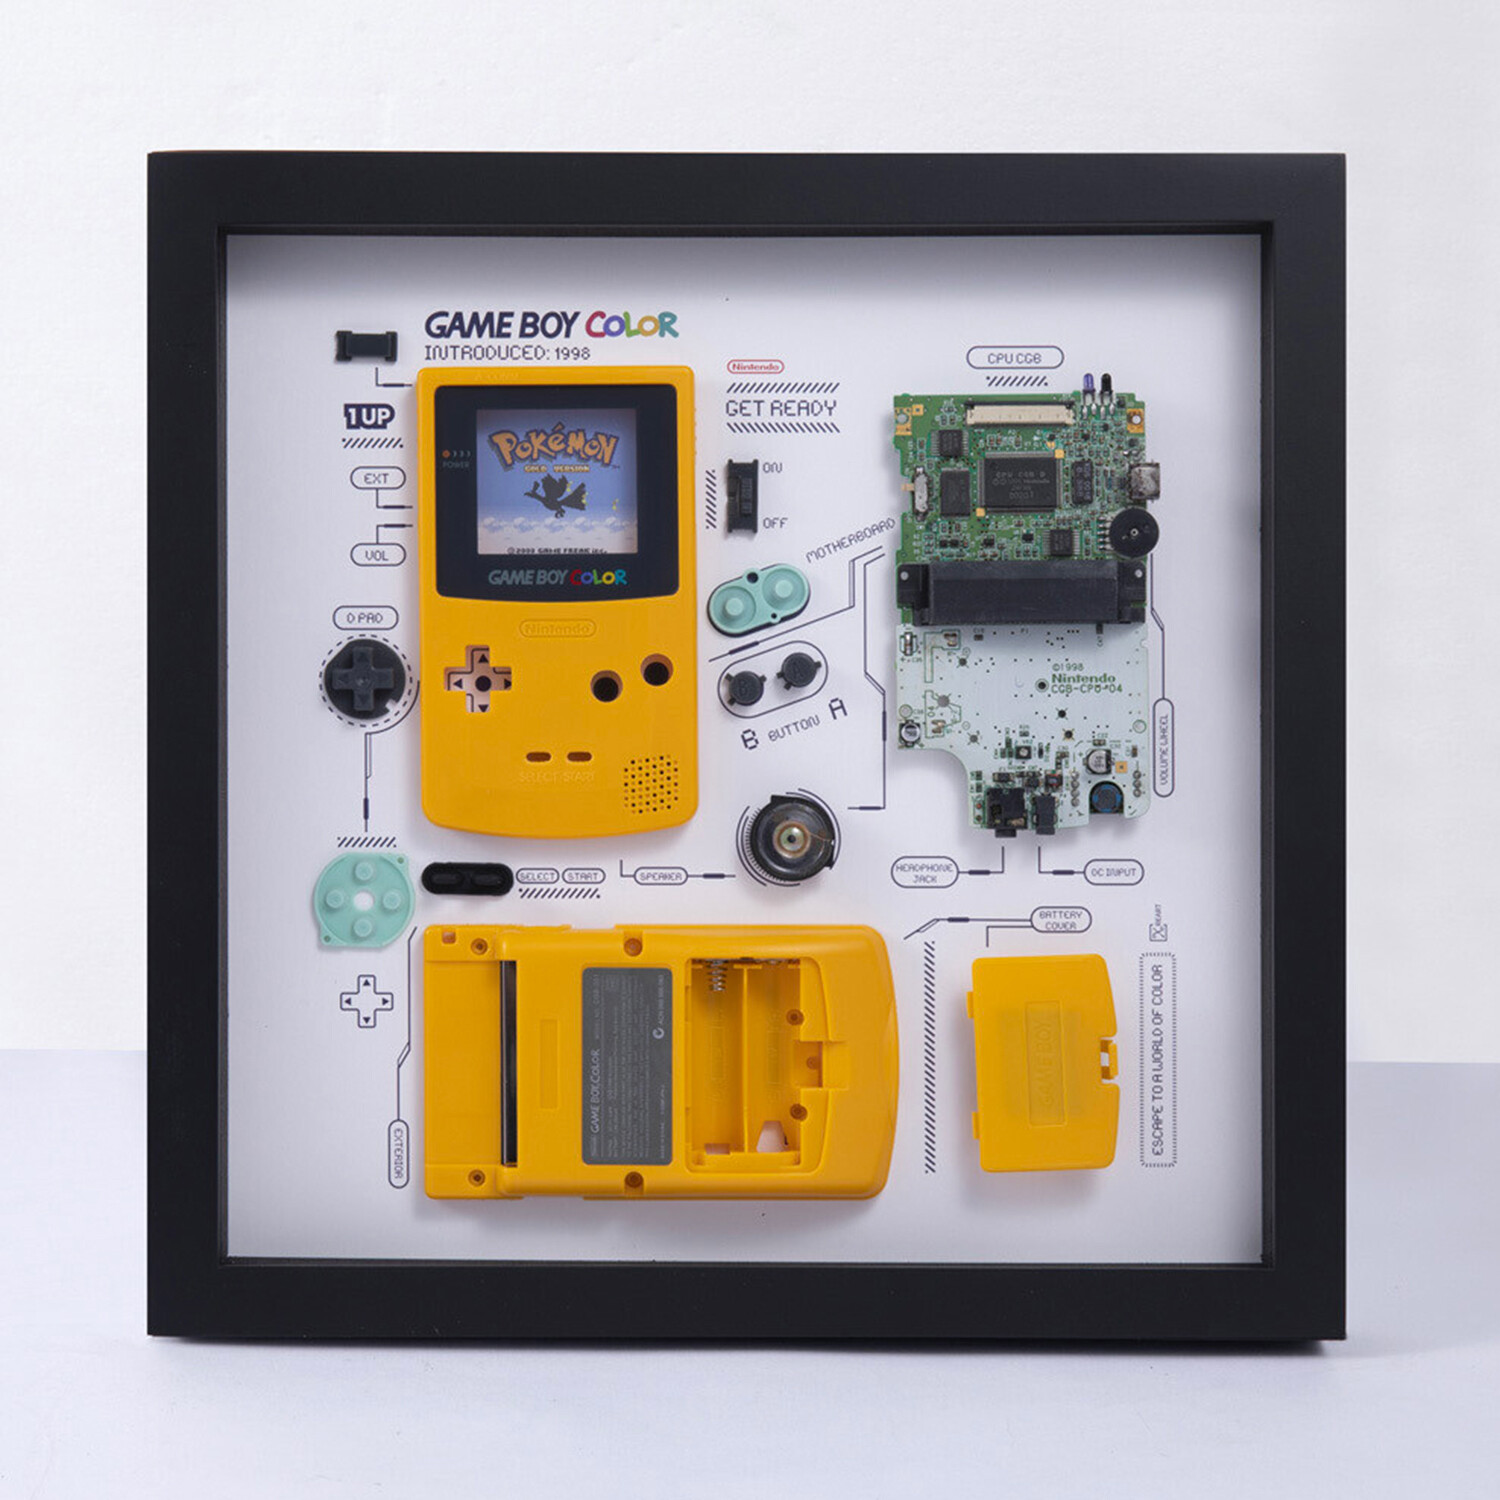 How much do you know about Gameboy Color? - XreArt Studio